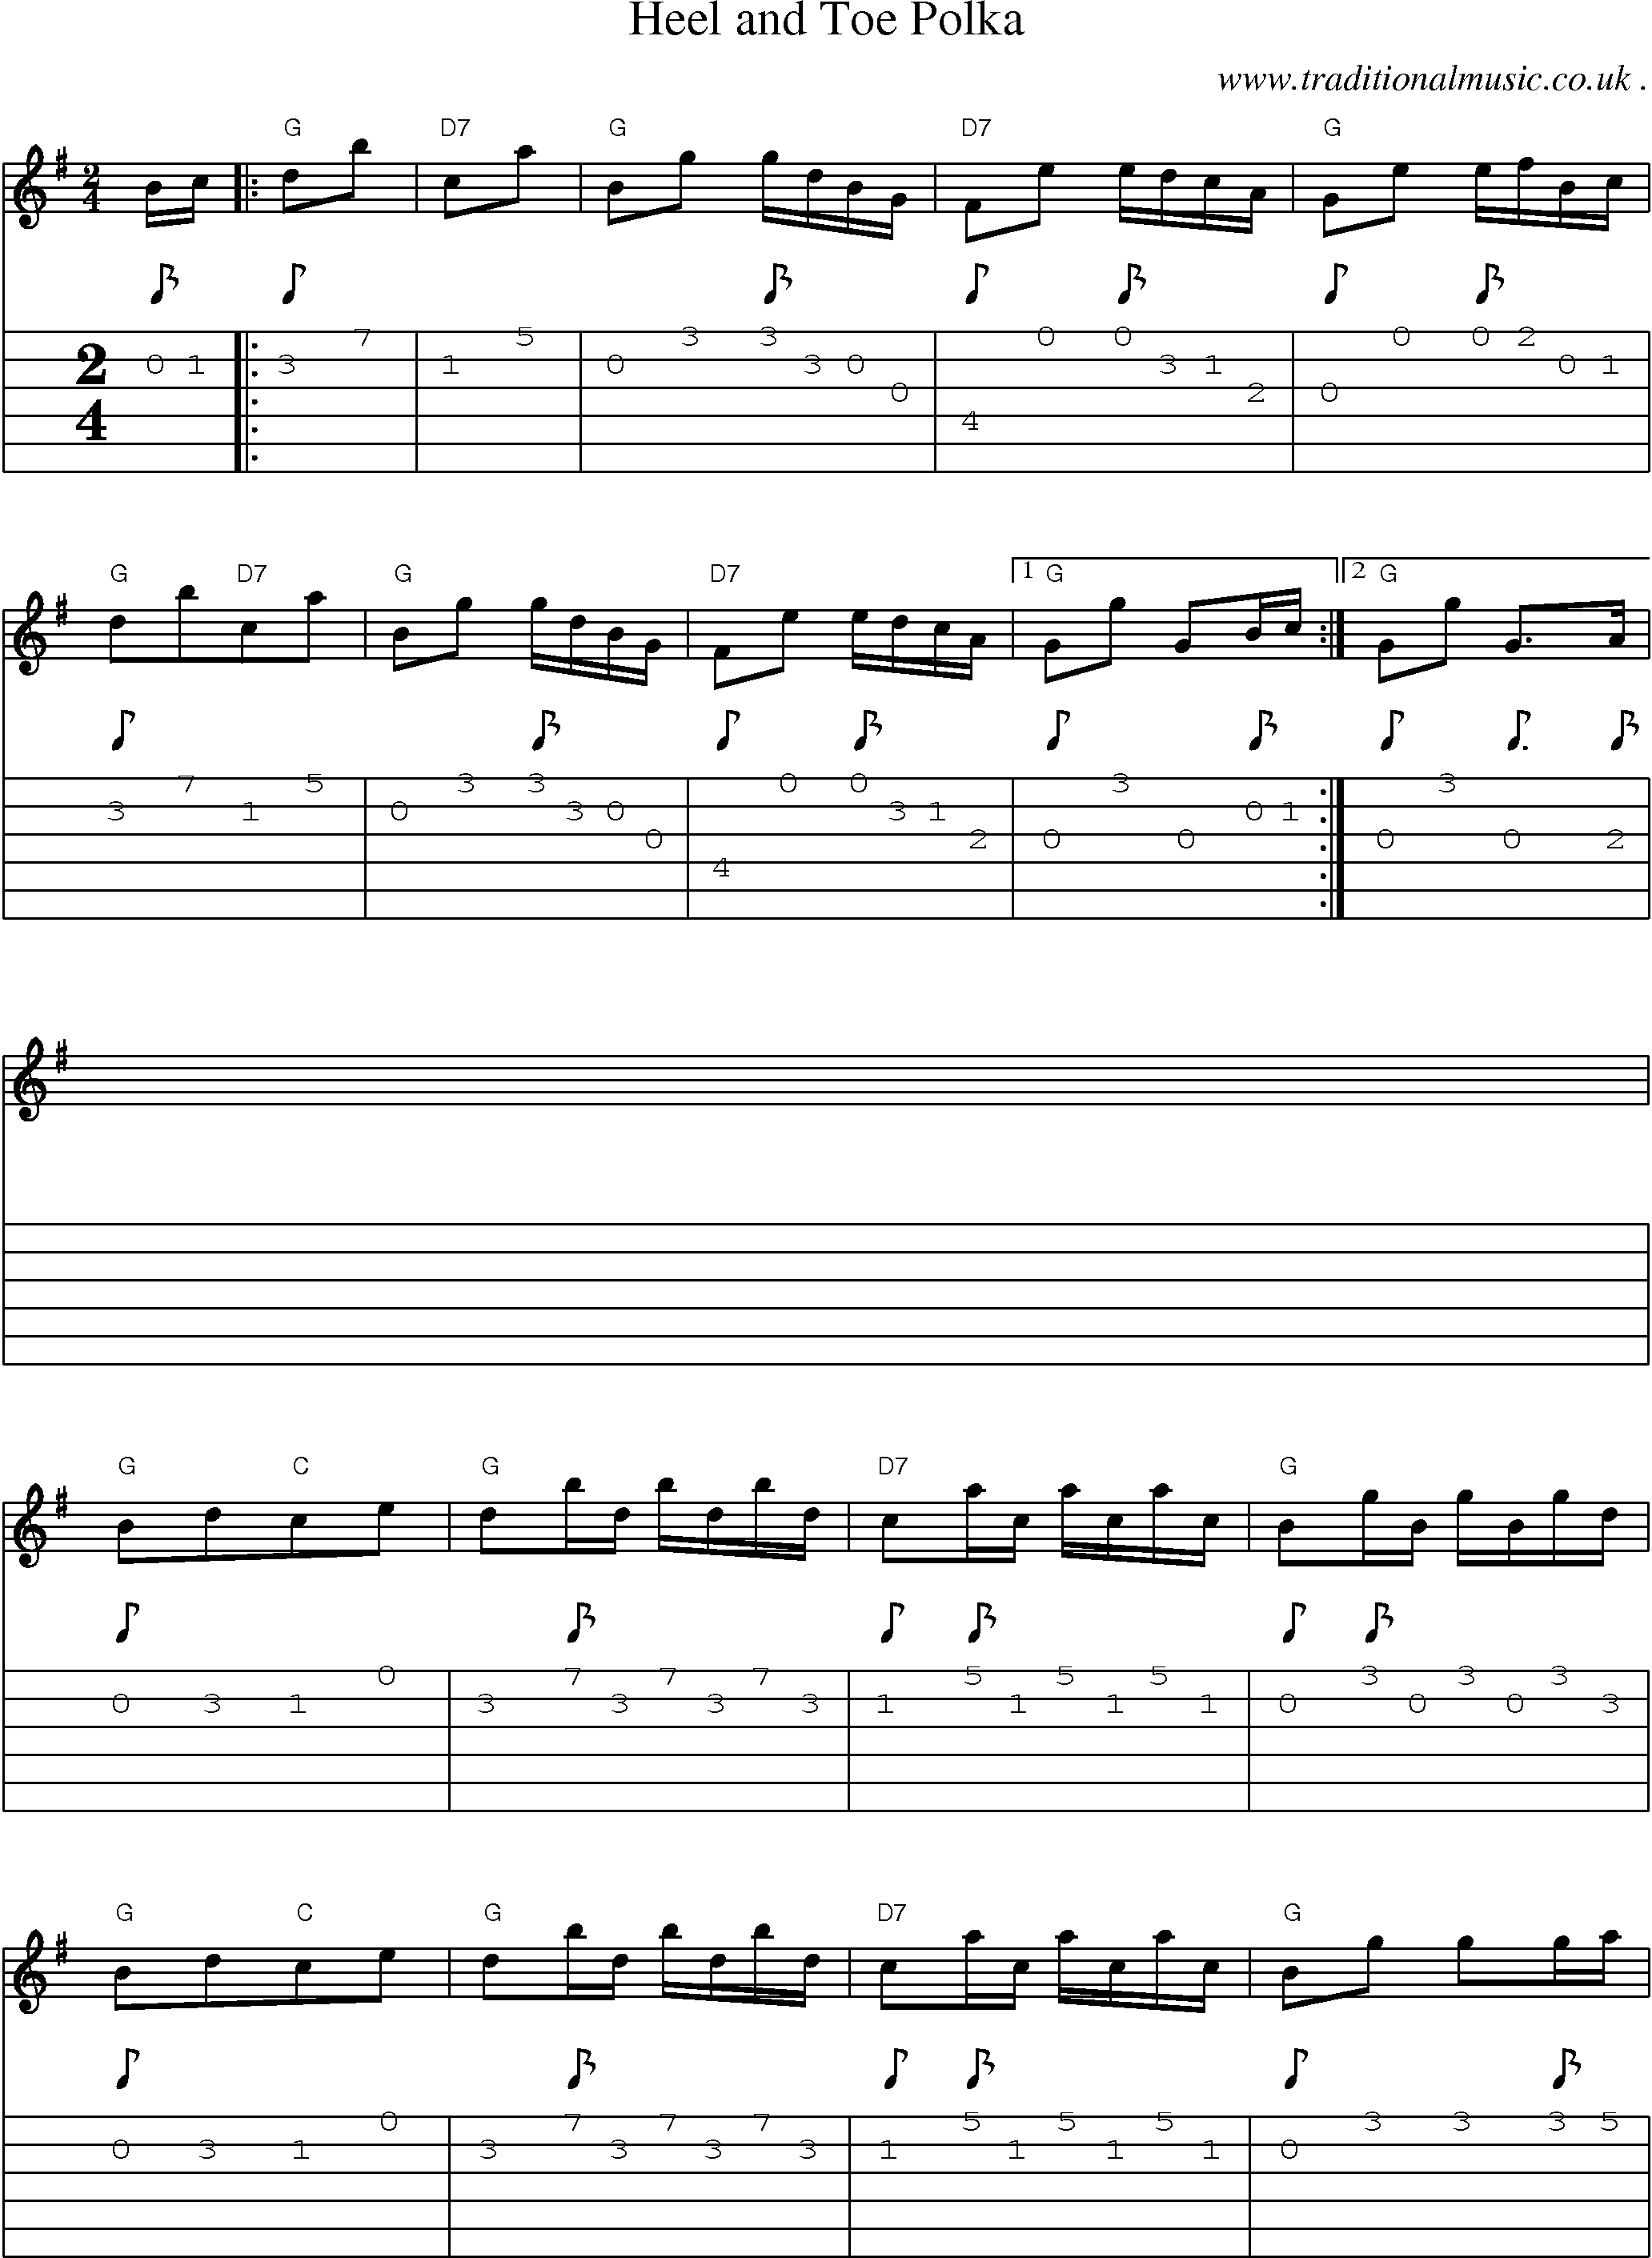 Sheet-Music and Guitar Tabs for Heel And Toe Polka